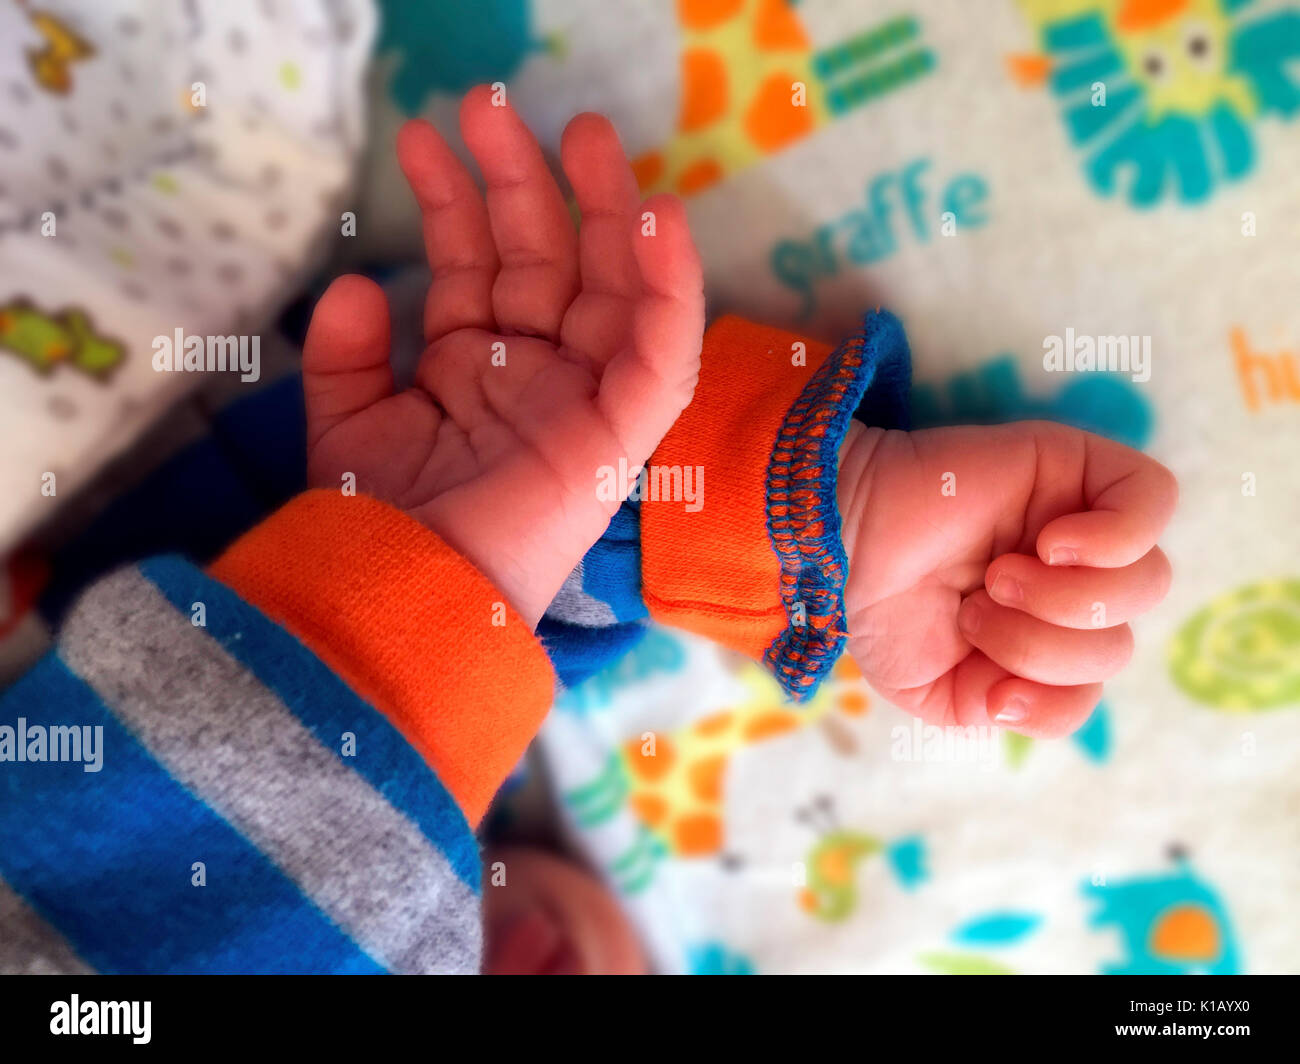 Baby's two hands while he's sleeping, Canada. Conceptual image for relaxation, contentment, repose, peaceful, at ease. Stock Photo